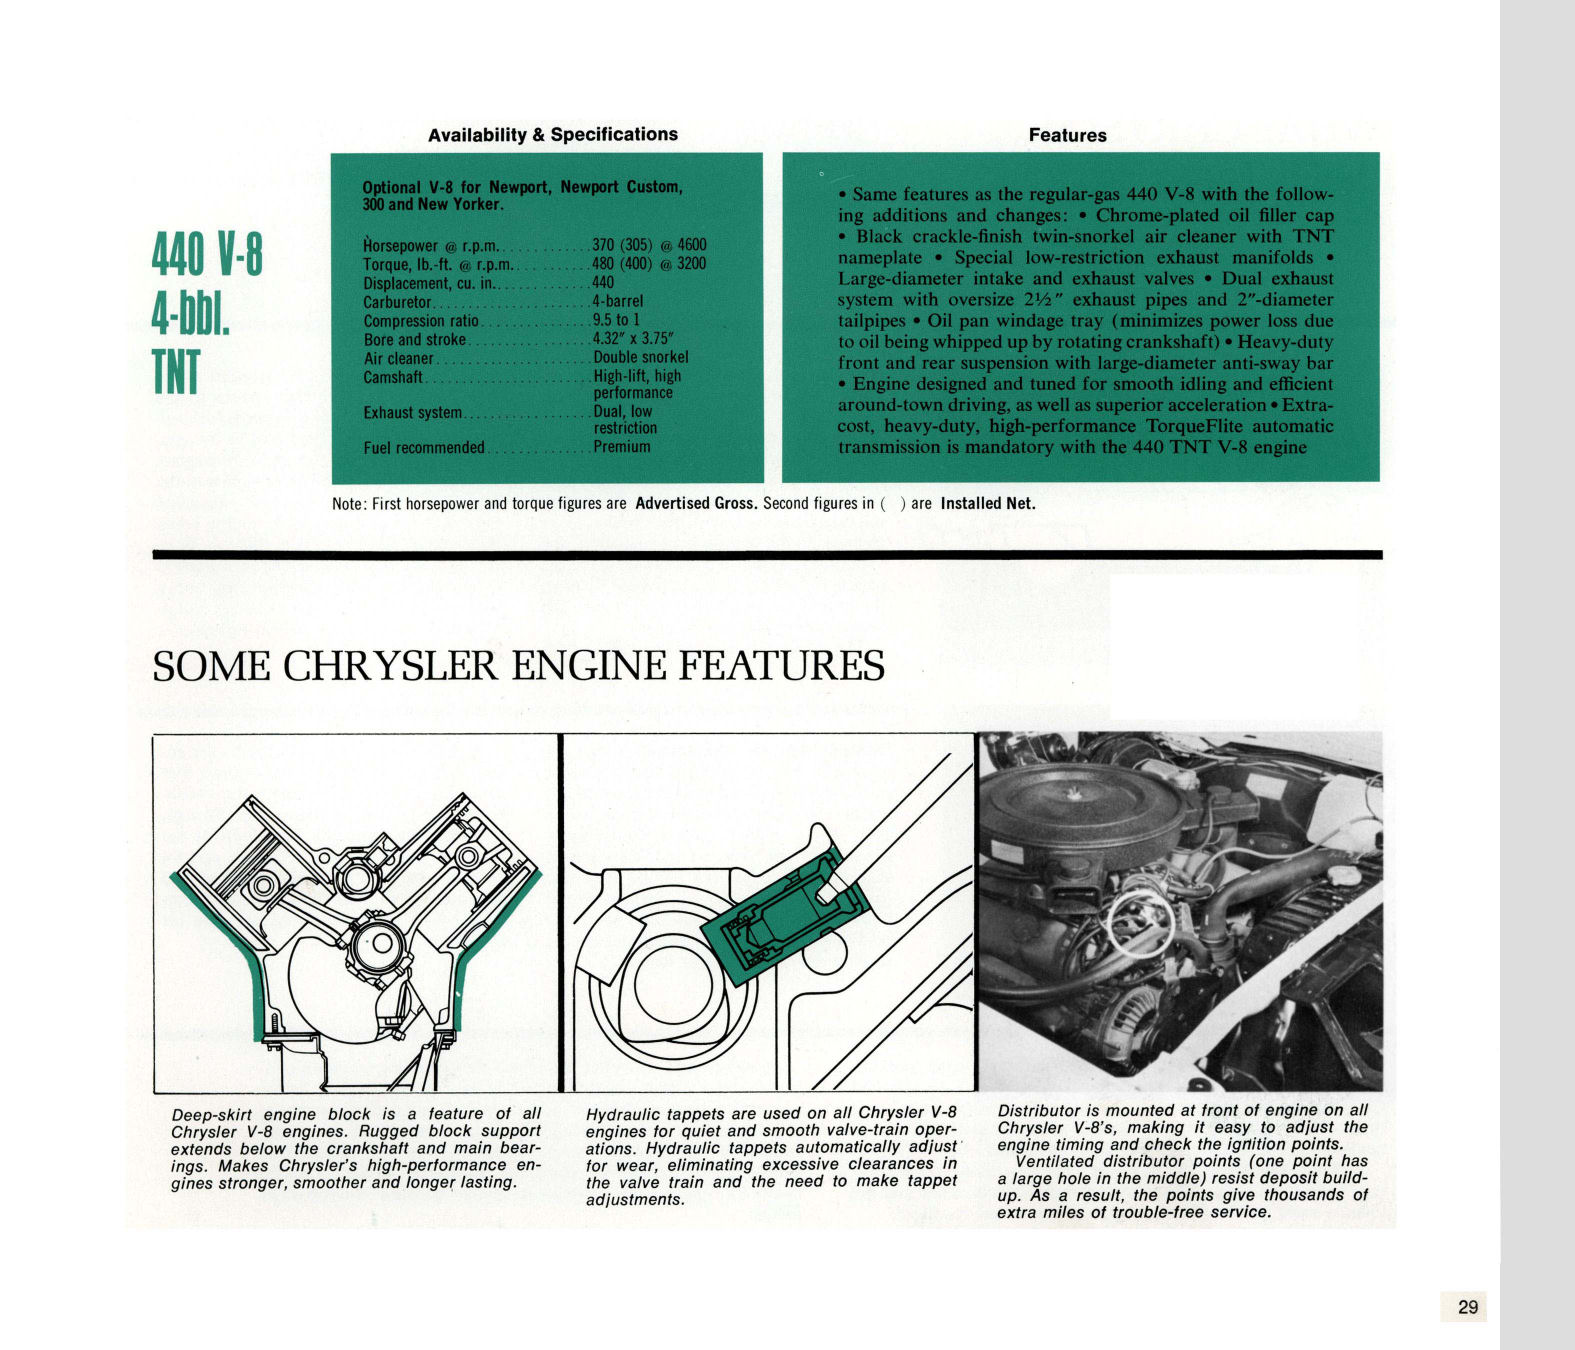 1971 Chrysler Features-29